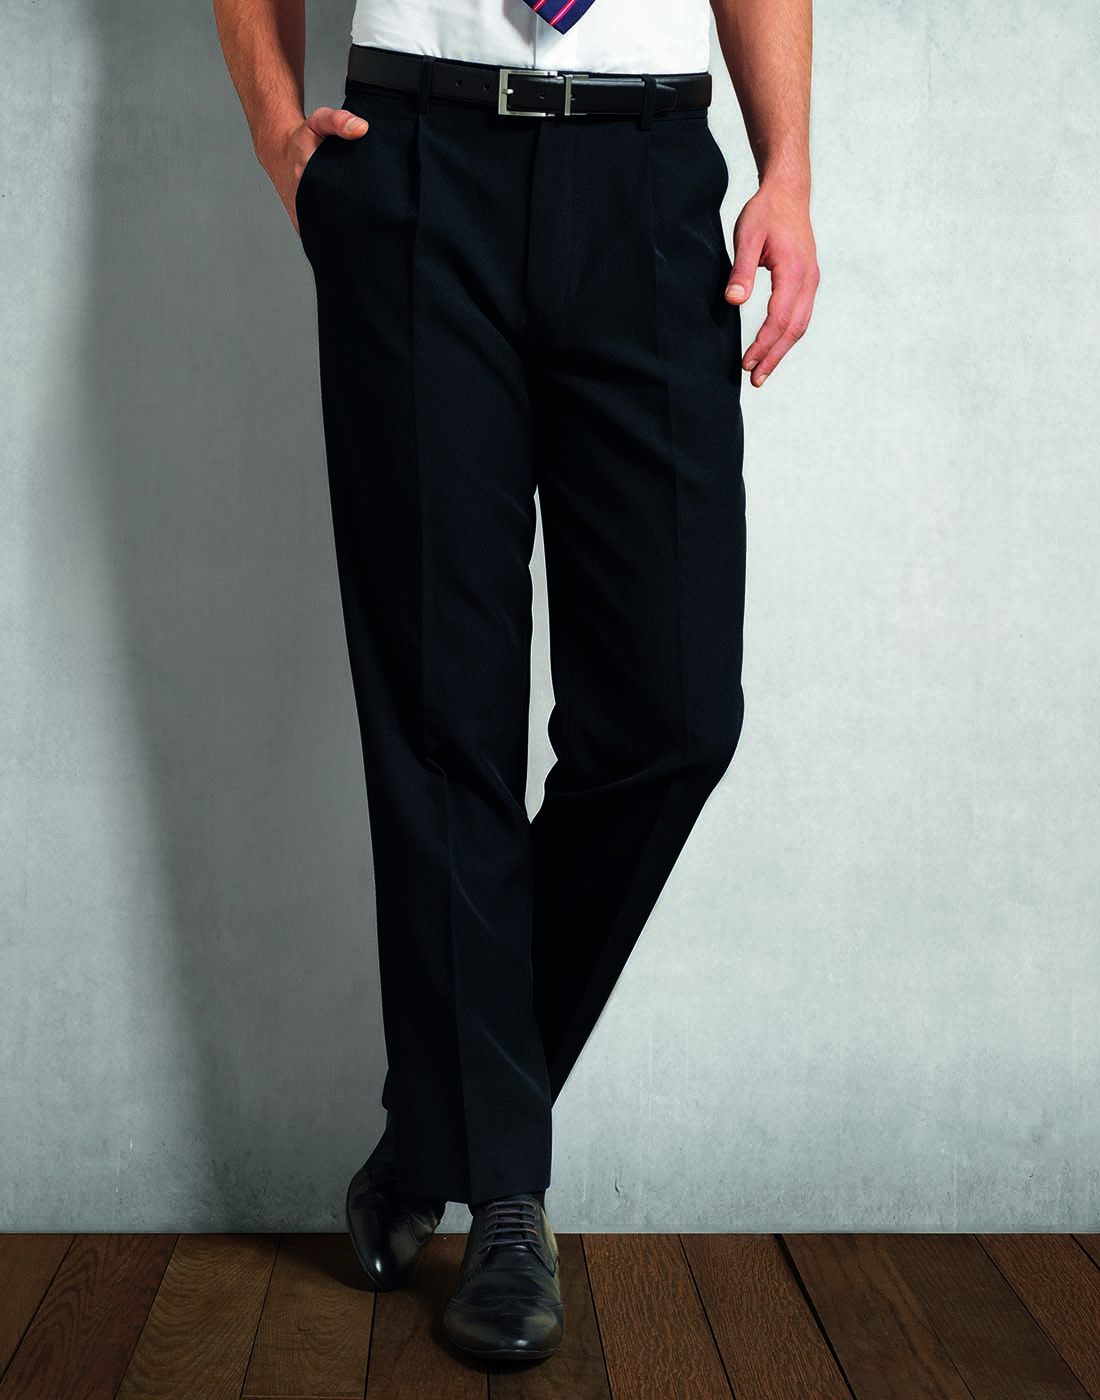 LADIES POLYESTER VISCOSE FLAT FRONT CUFFED WORK CASUAL OFFICE PANTS TROUSERS  | eBay